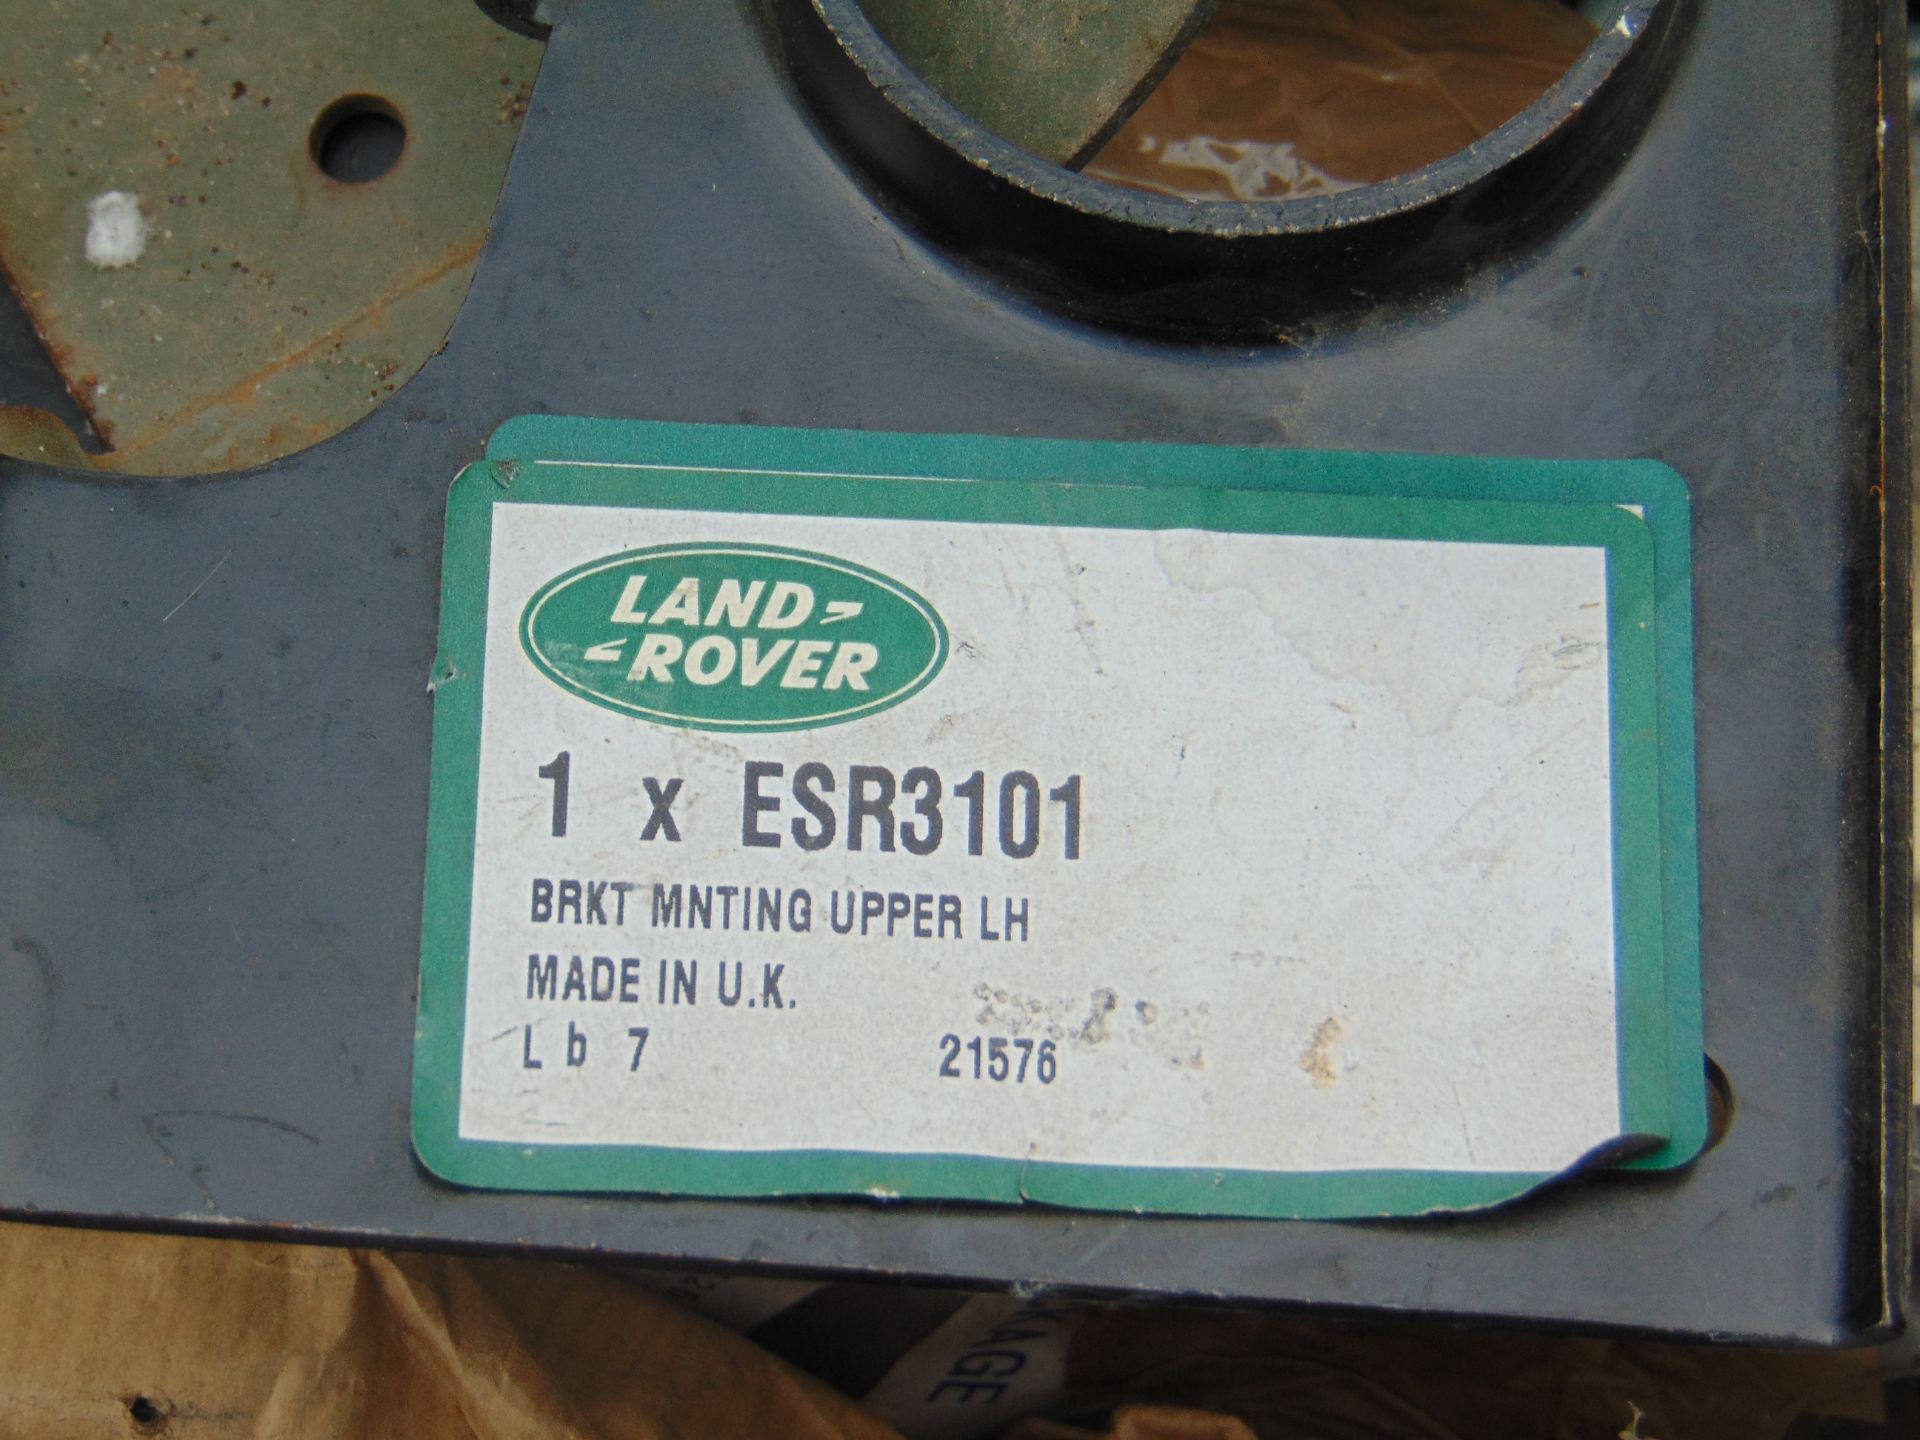 MIXED LANDROVER LEYLAND DAF, BEDFORD ETC- SPARE PARTS - Image 5 of 7